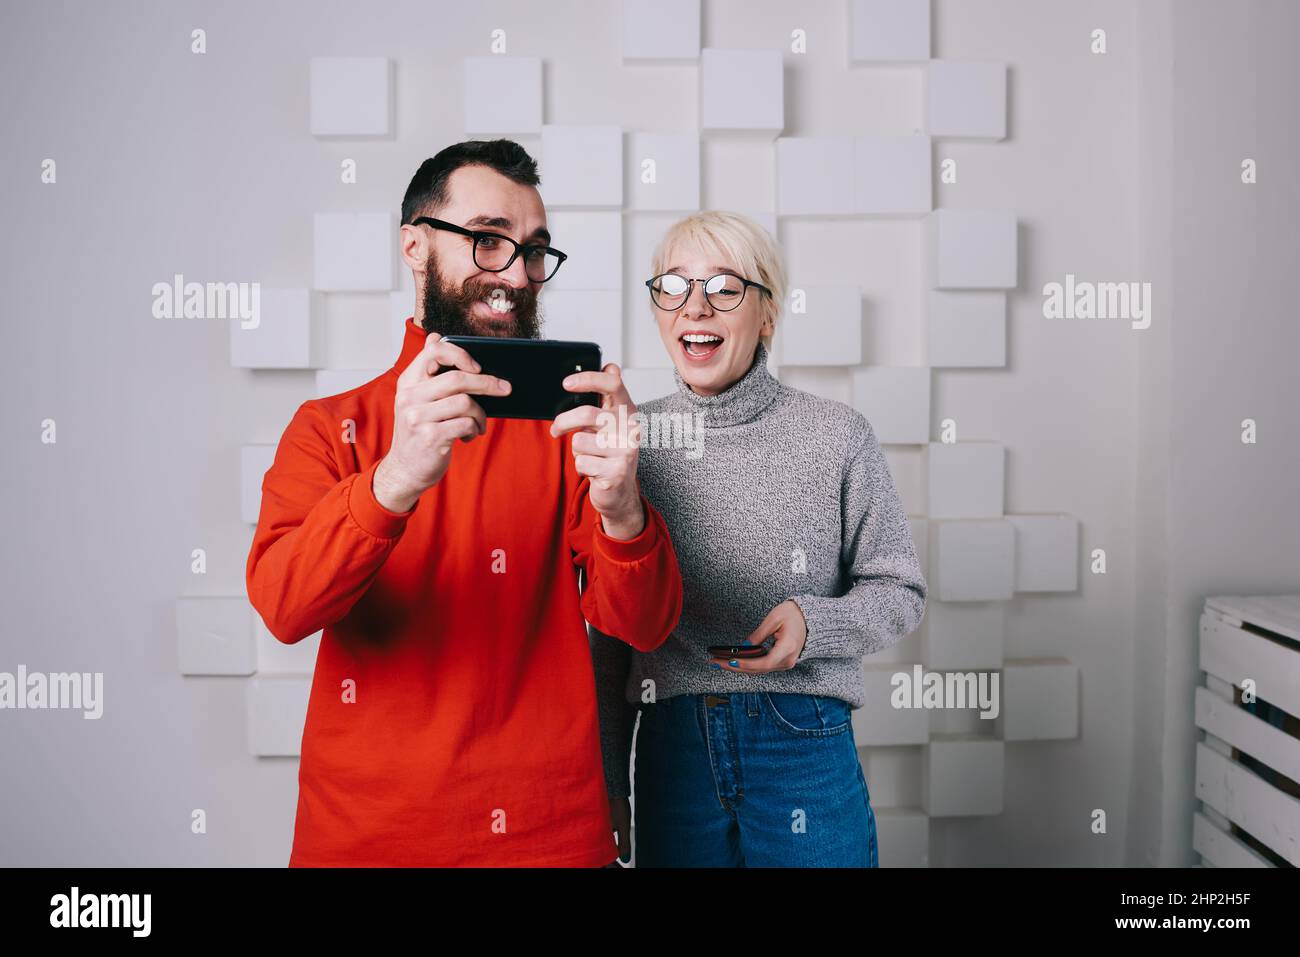 Happy modern startup colleagues sharing smartphone Stock Photo